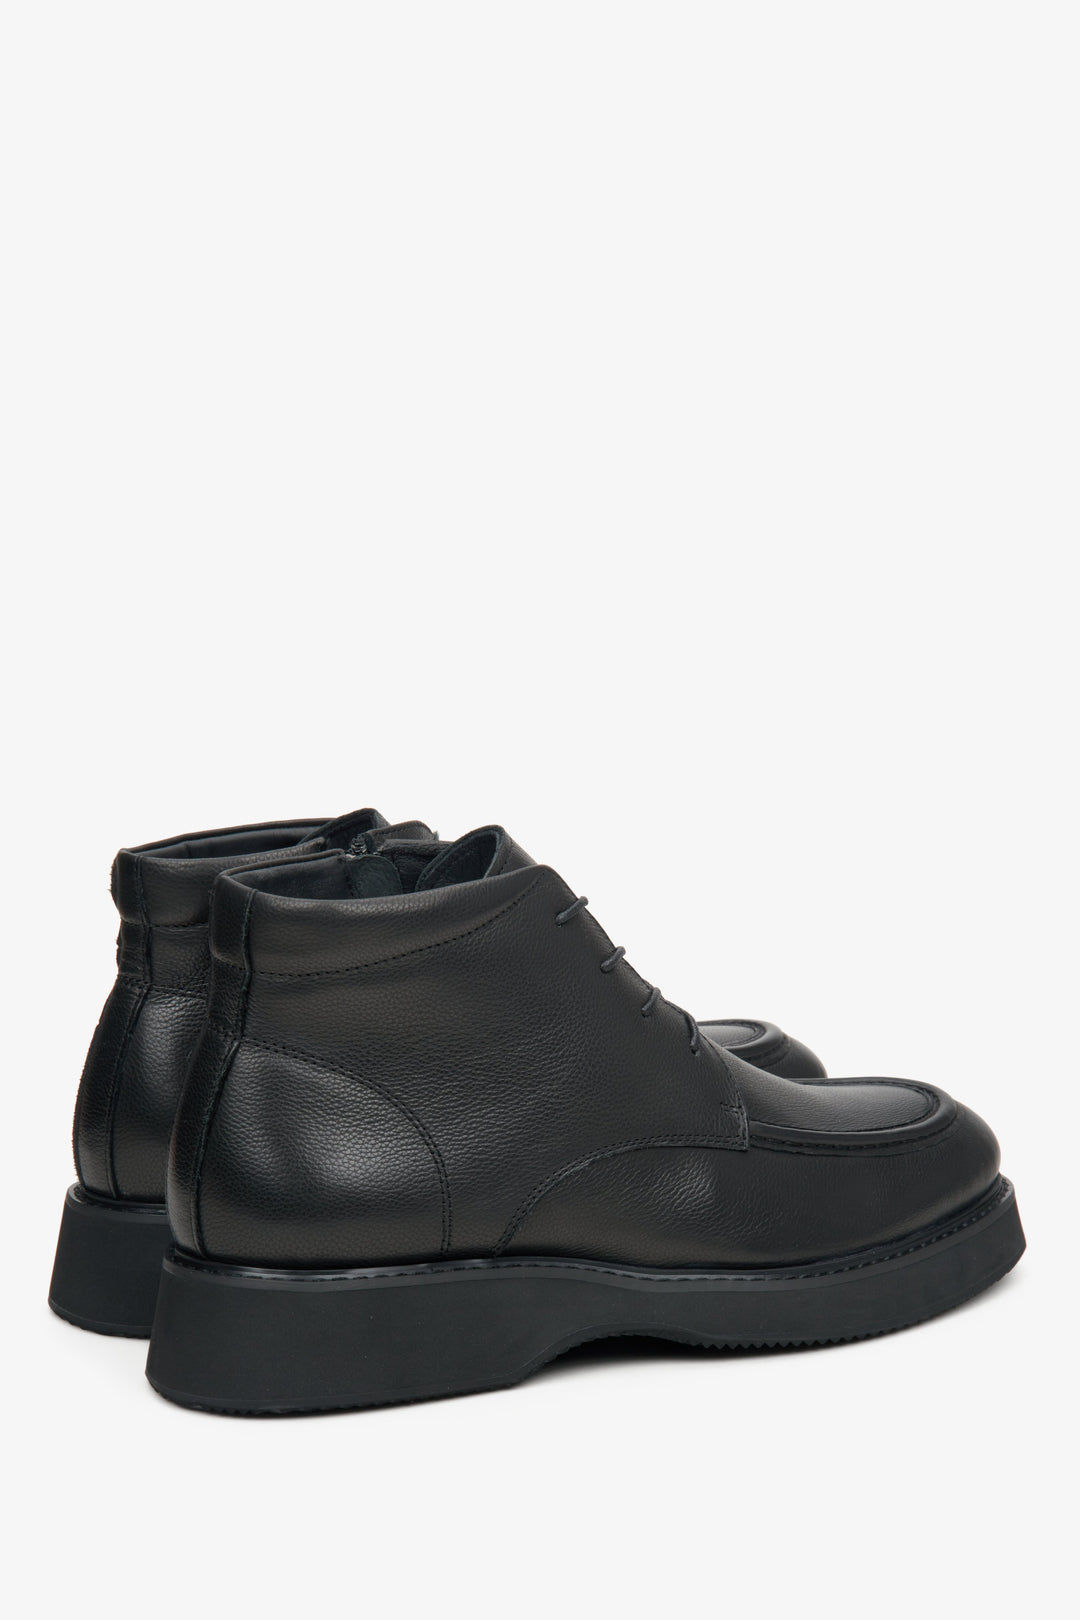 Men's black leather boots by Estro - close-up on the side line and heel counters.